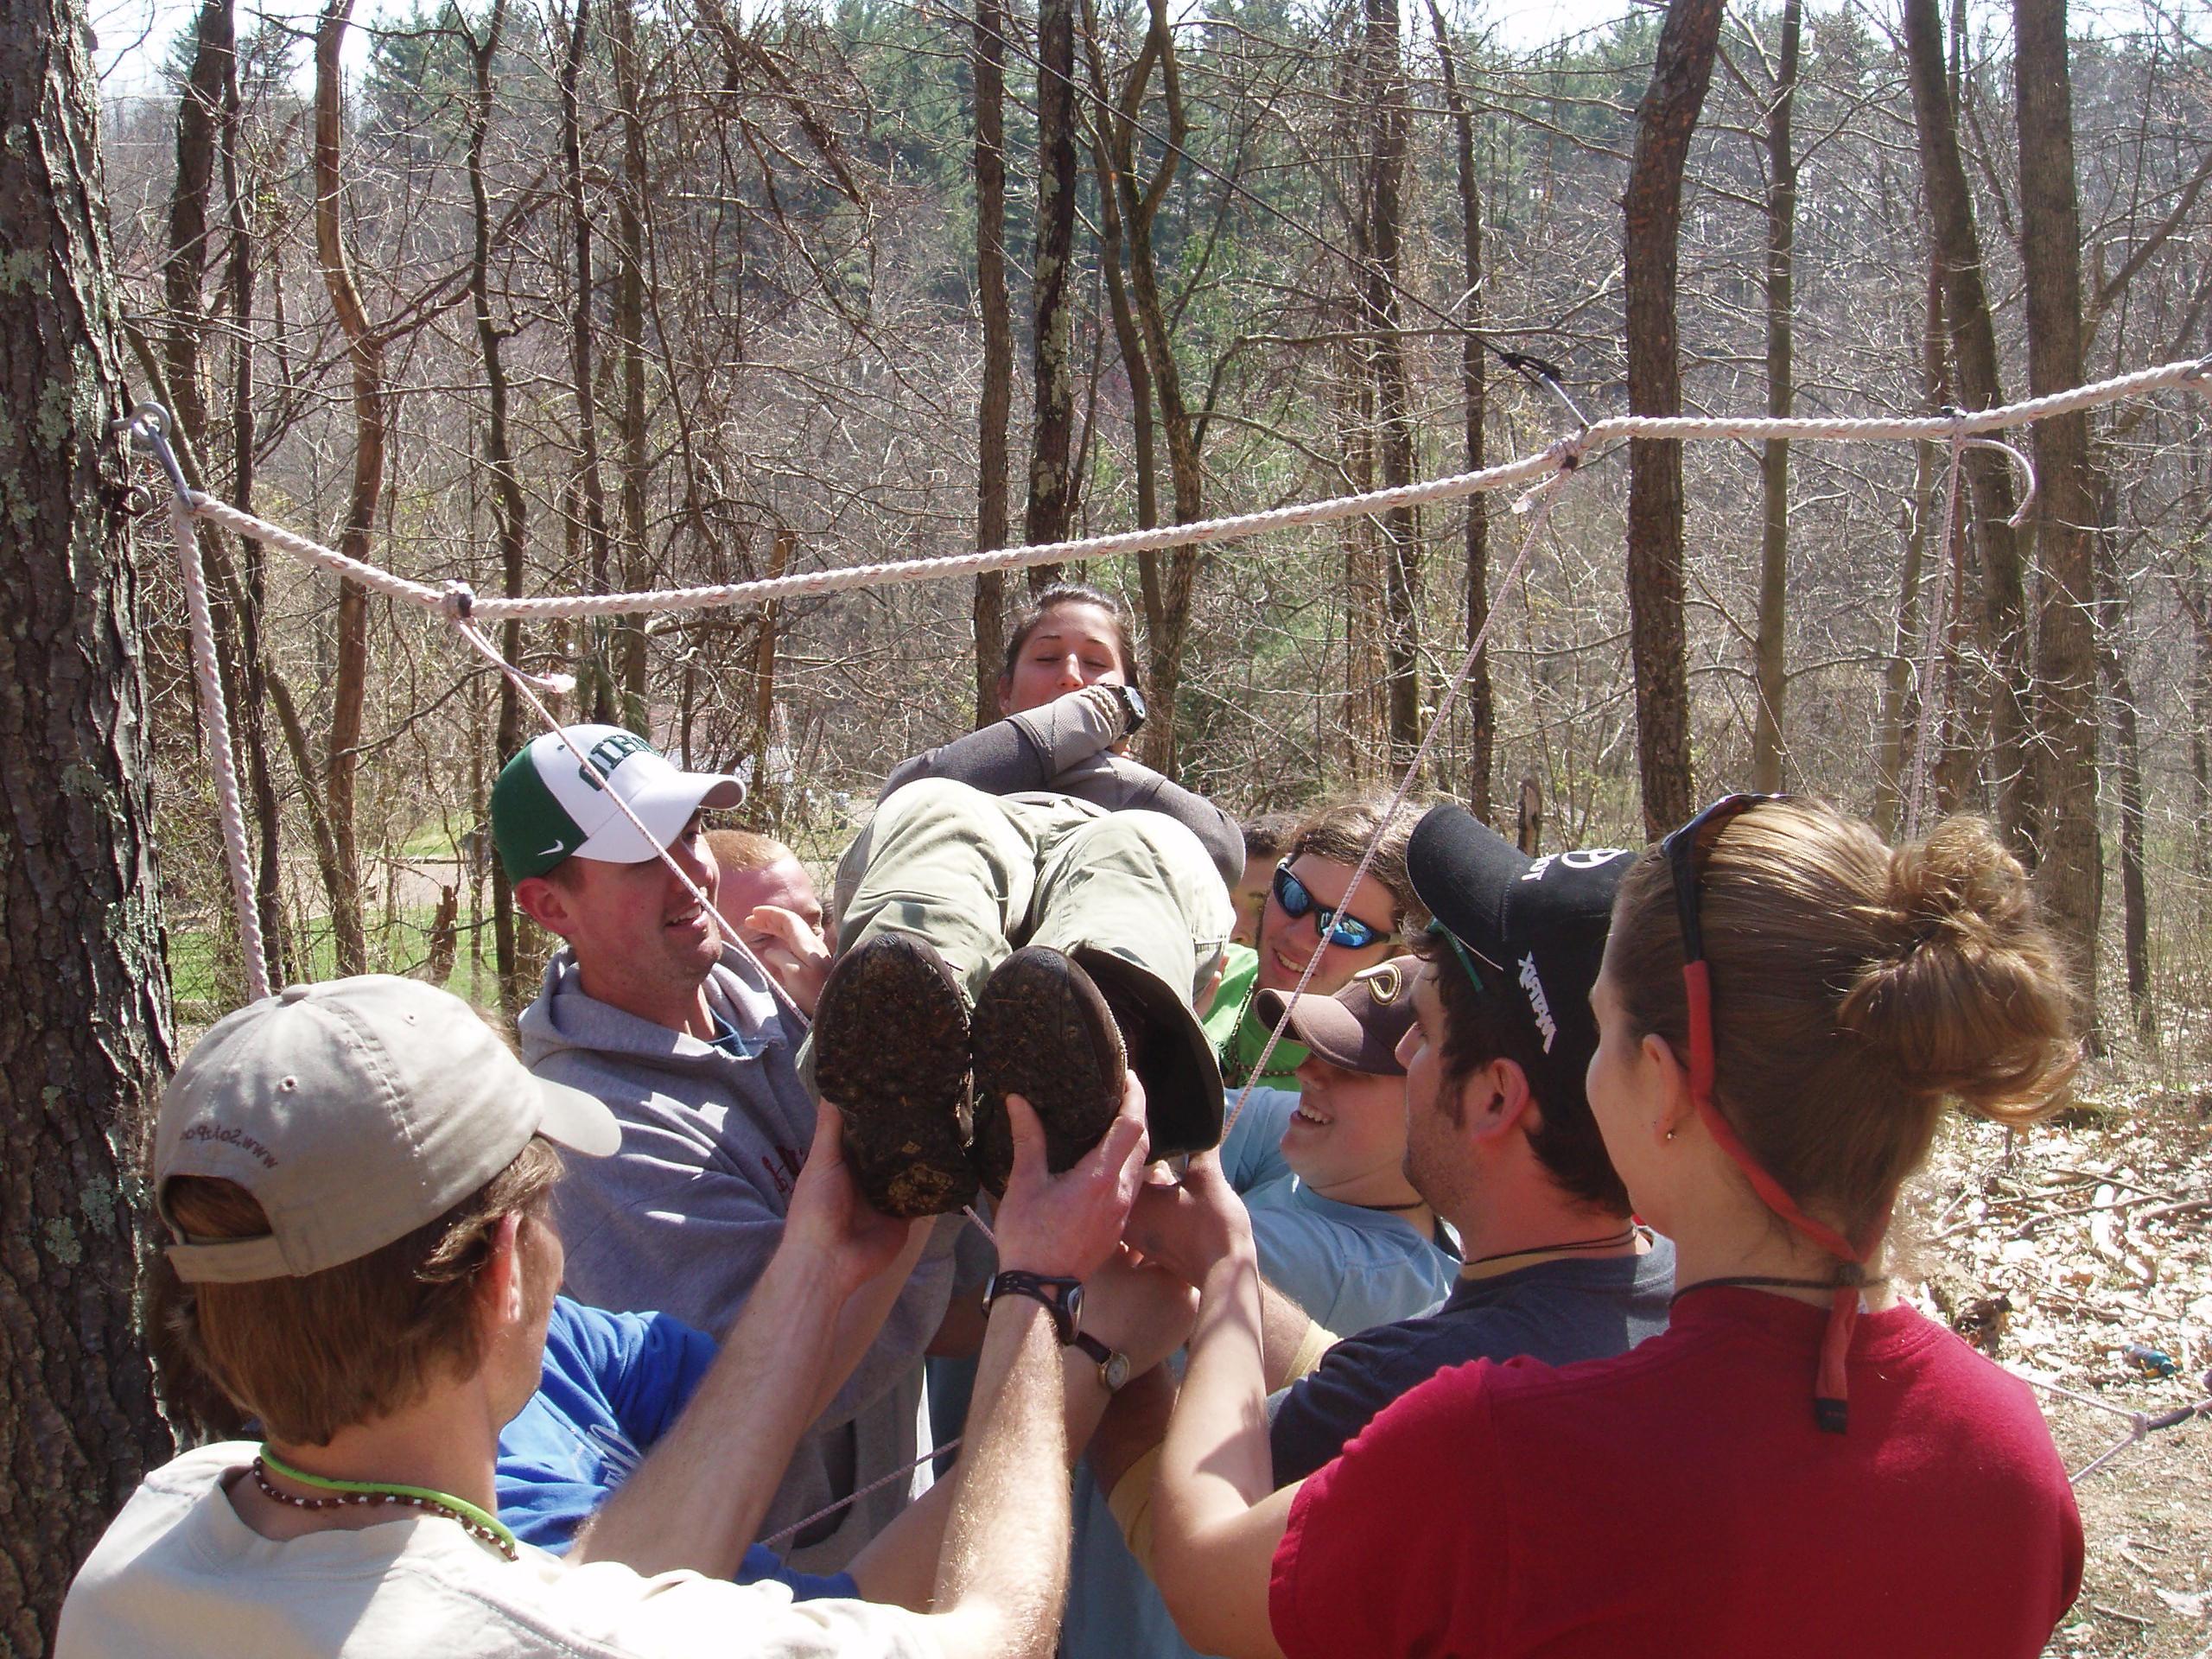 Group of people lifting a woman through a rope spider web